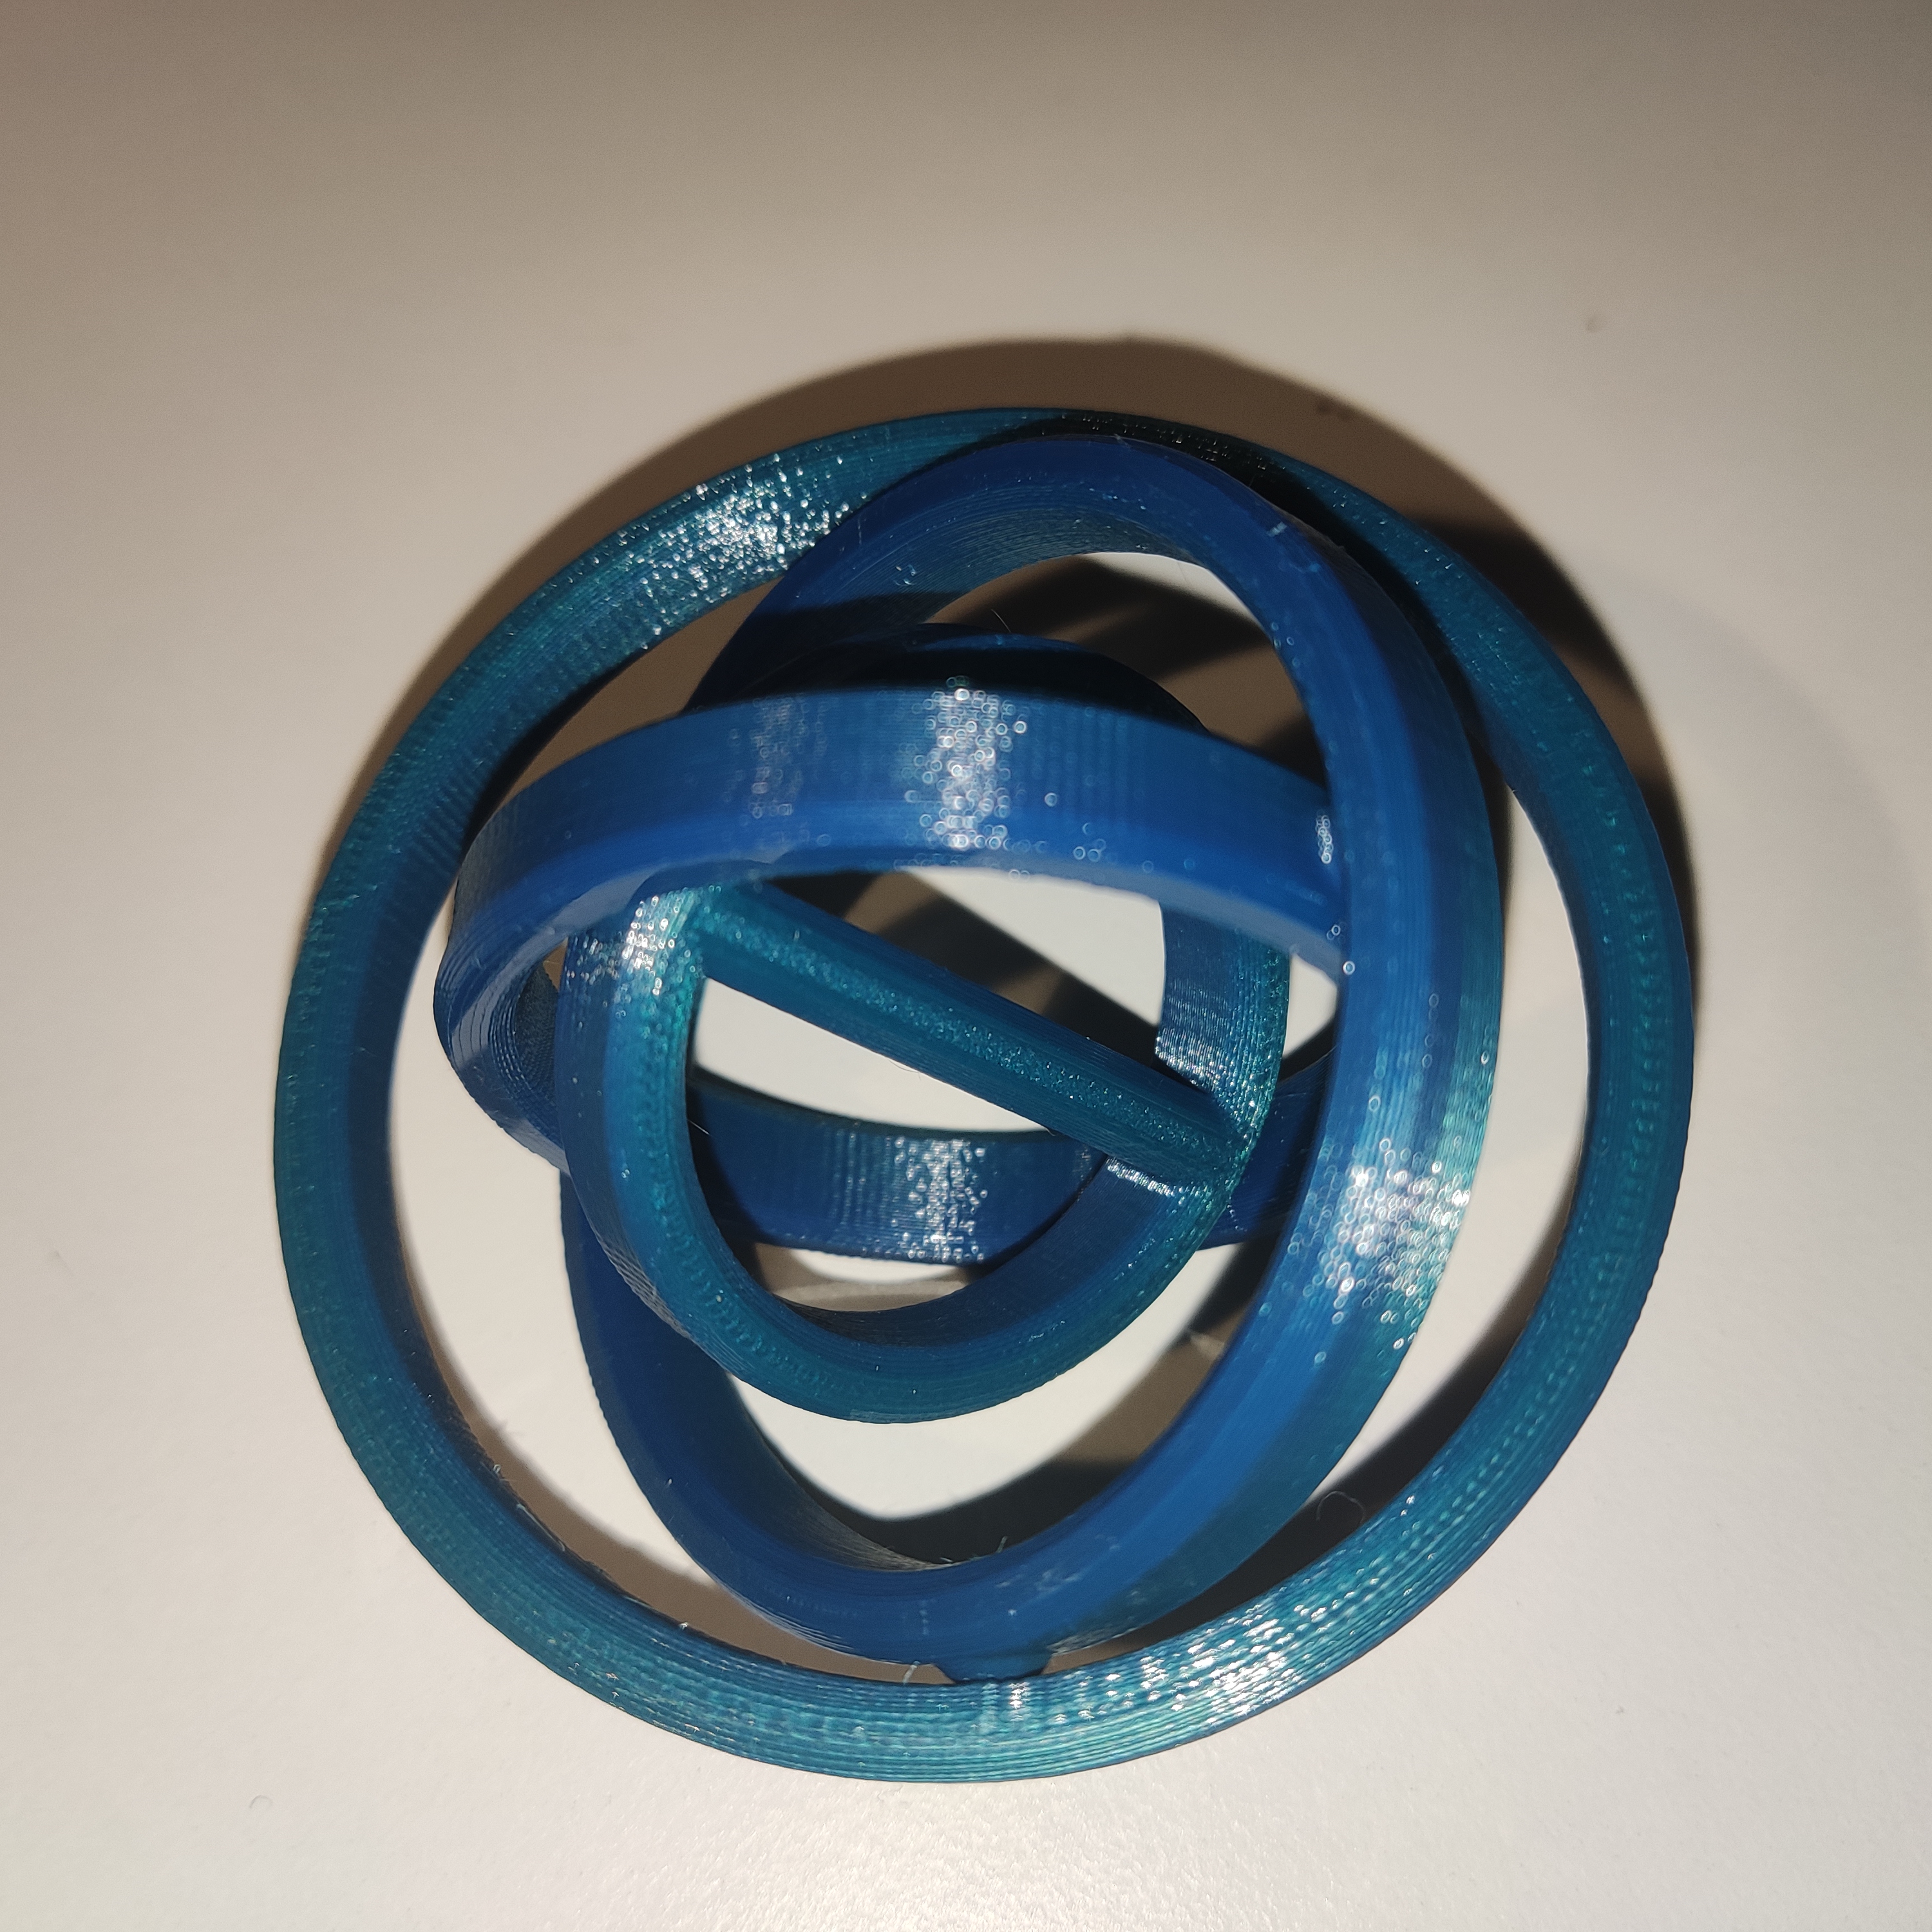 Rotating toy similar to gyro - Print in Place